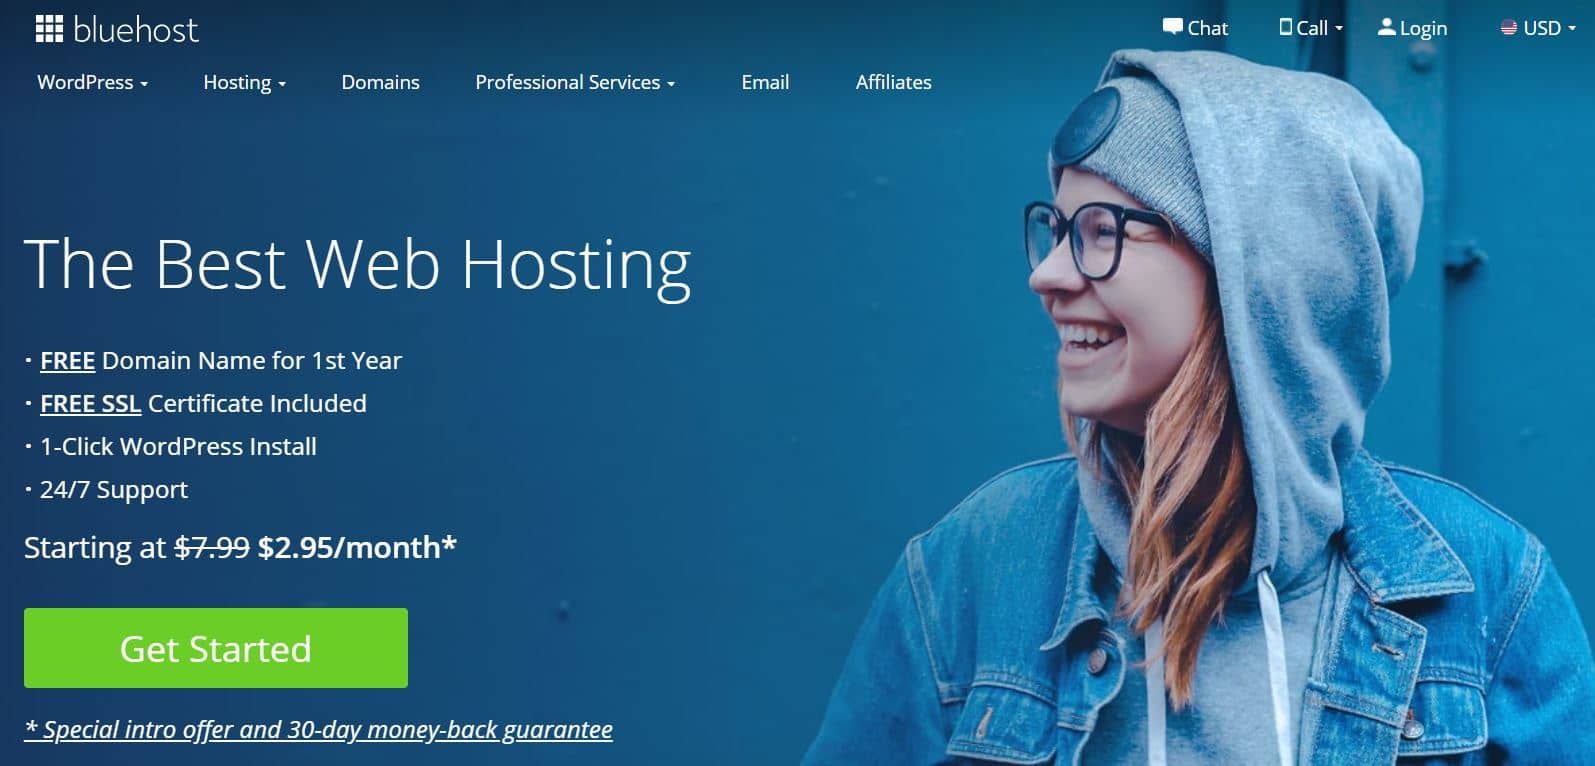 One of the most popular GoDaddy alternatives is Bluehost.